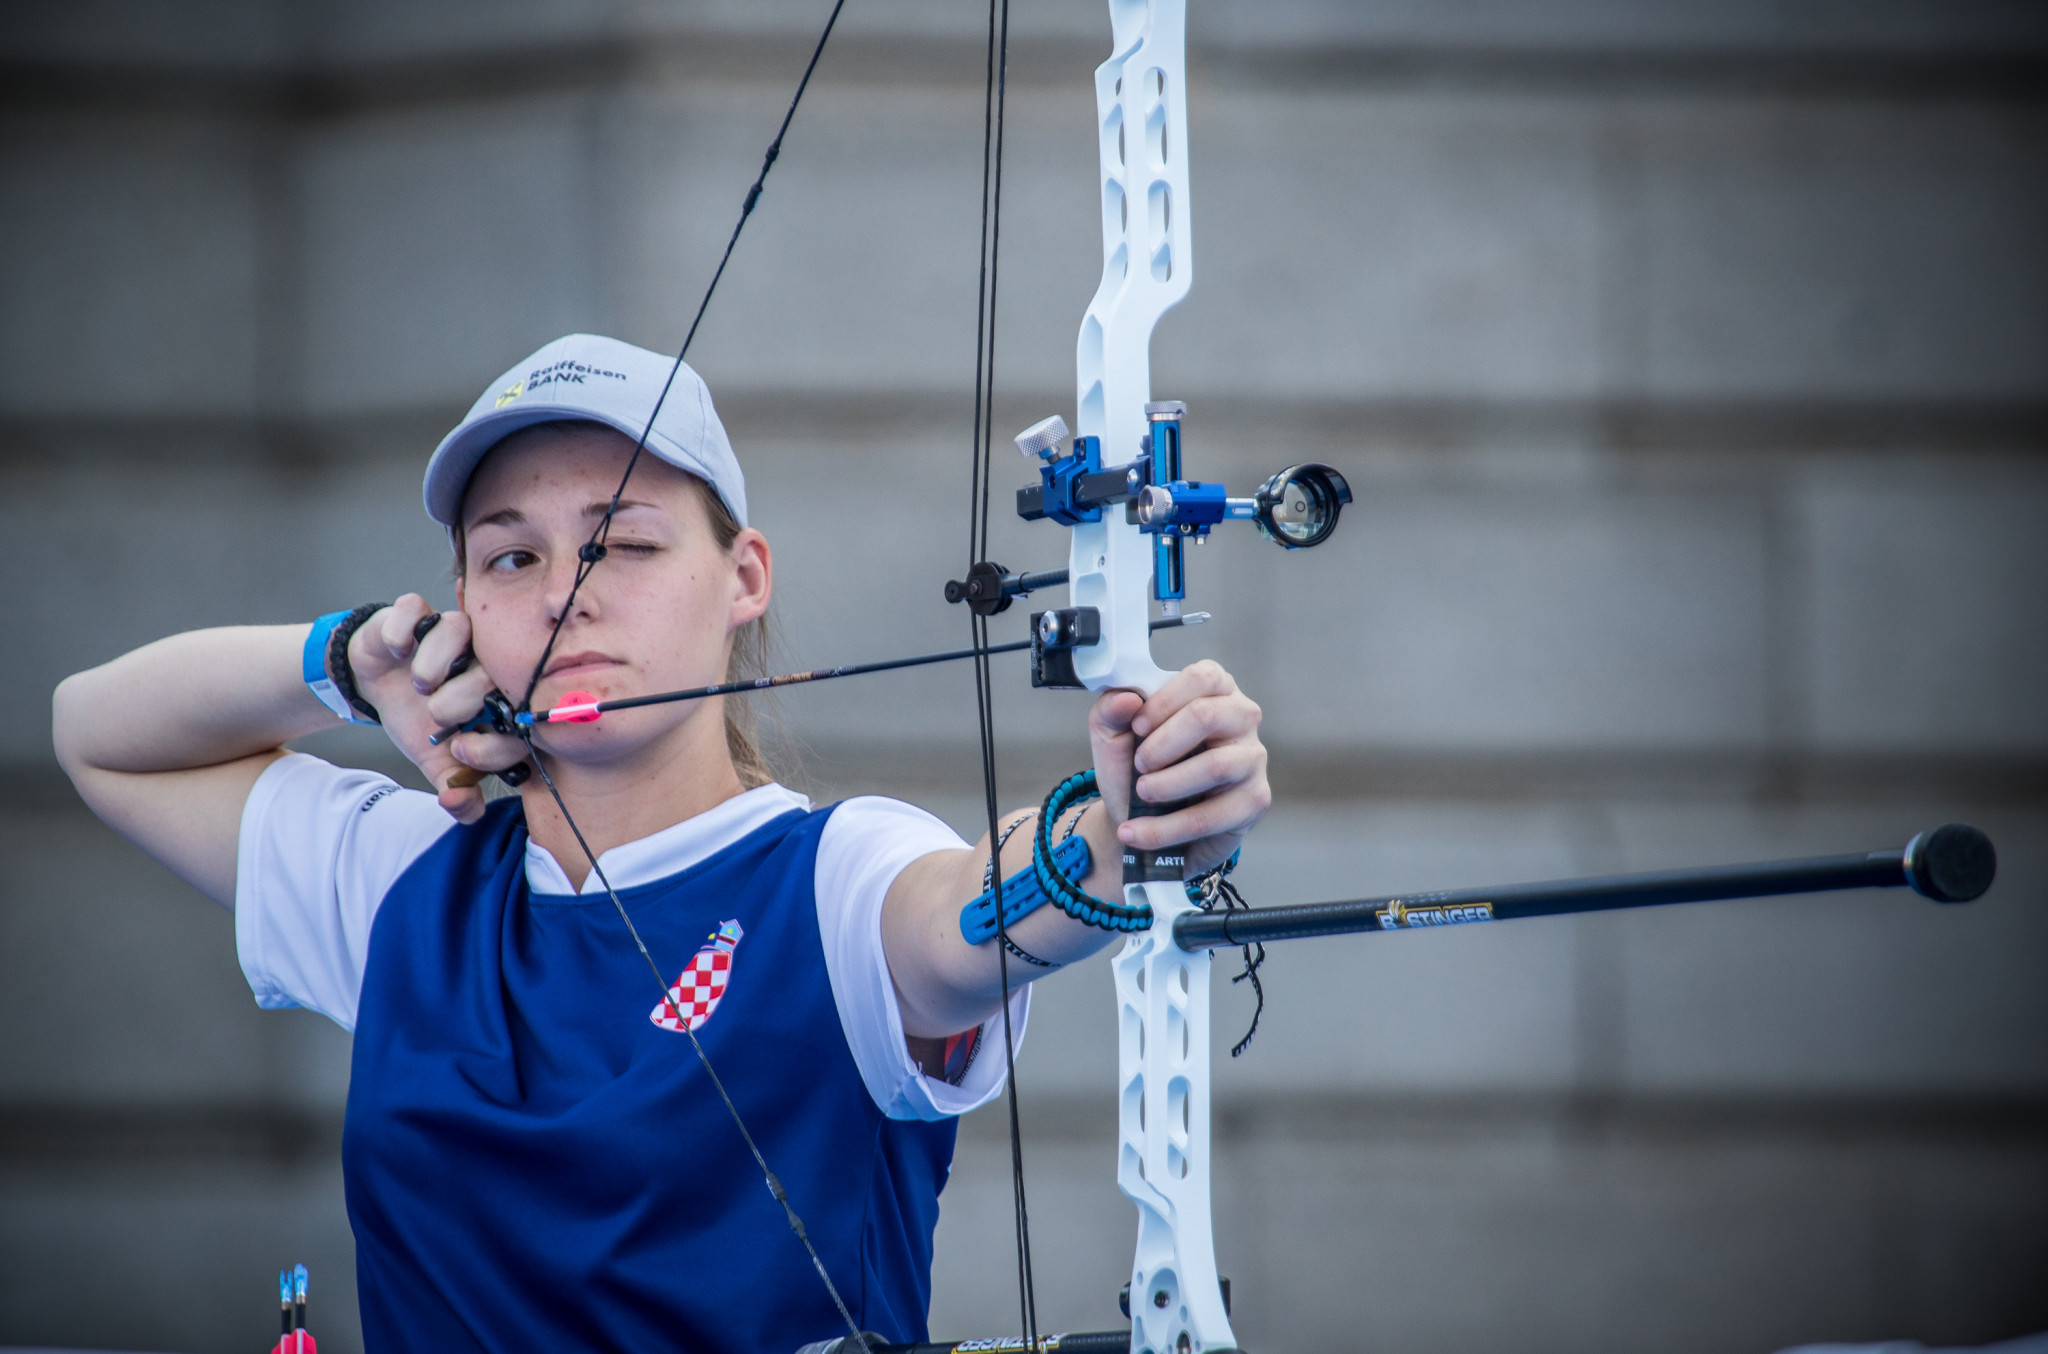 Croatian pair top compound qualifying at European Field Archery Championships